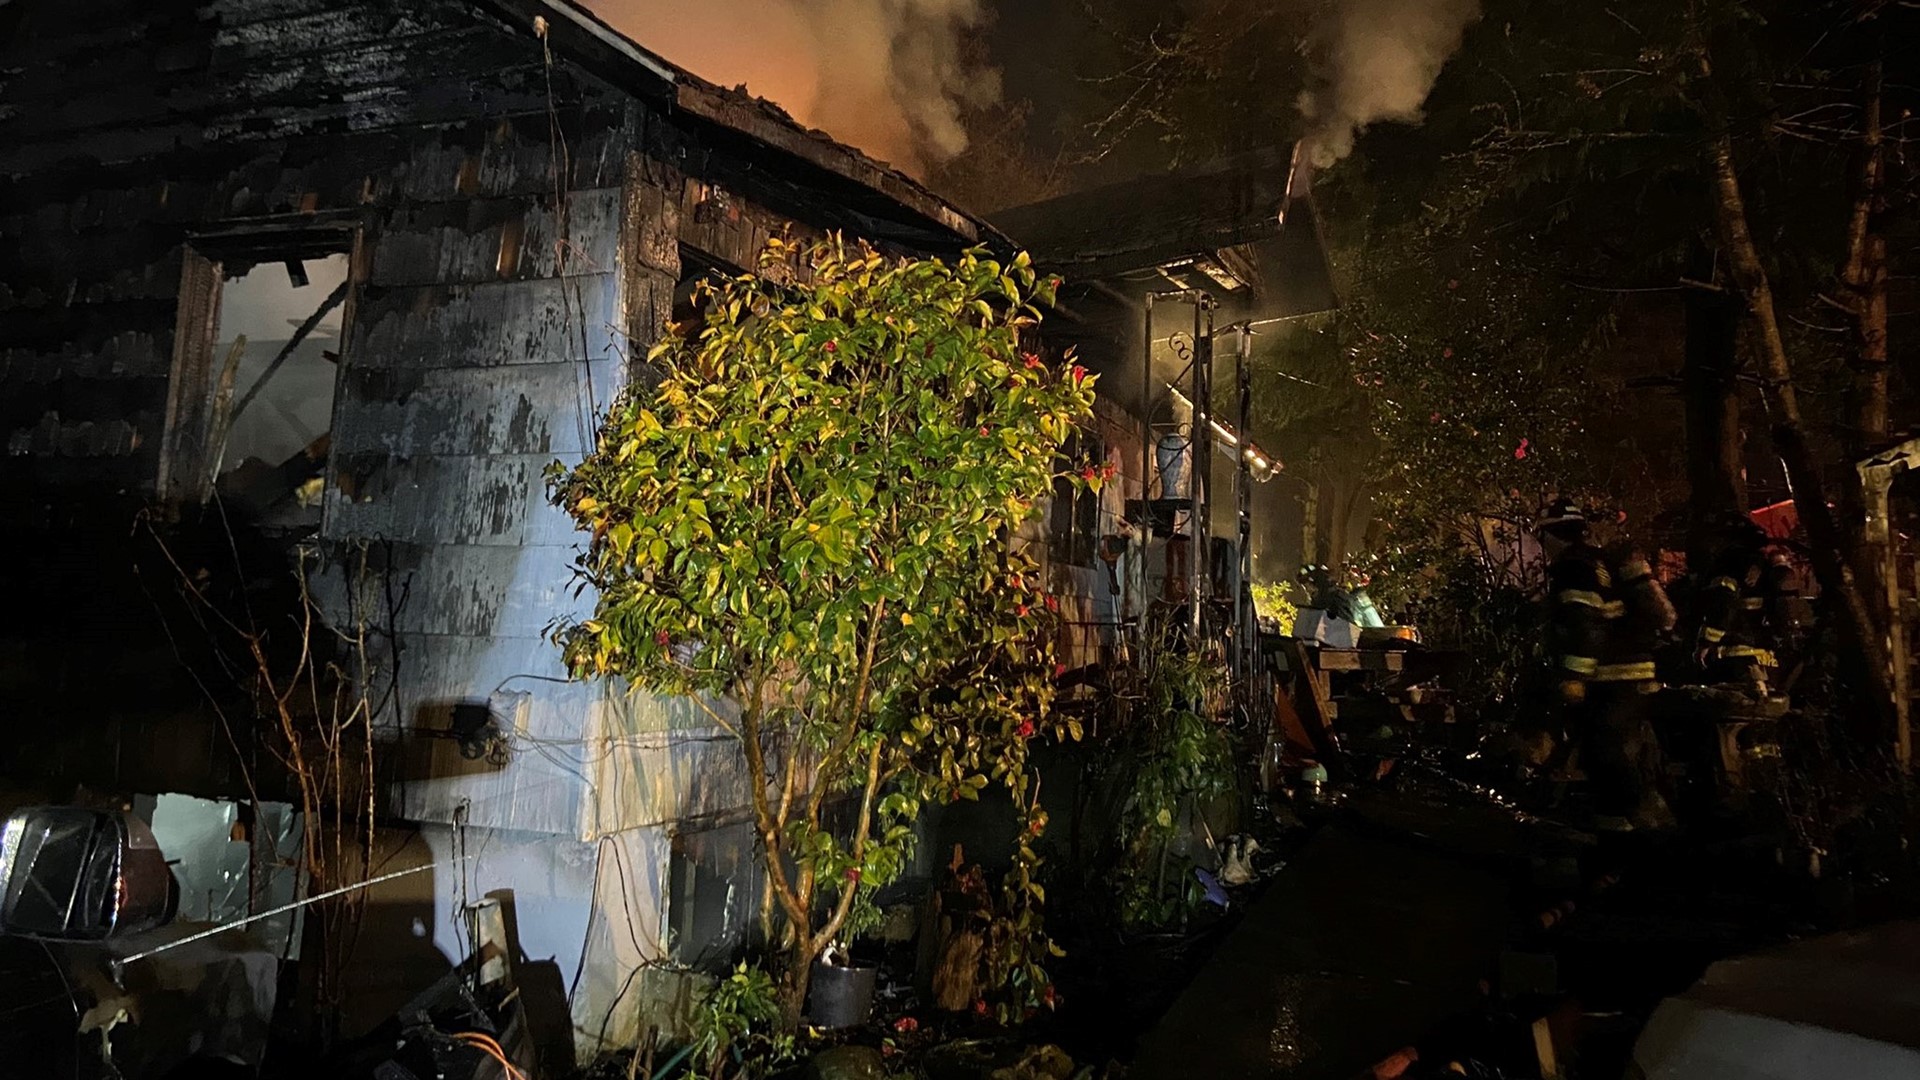 A man and his seven-year-old daughter were killed in a house fire in south Snohomish County on April 15, 2021.